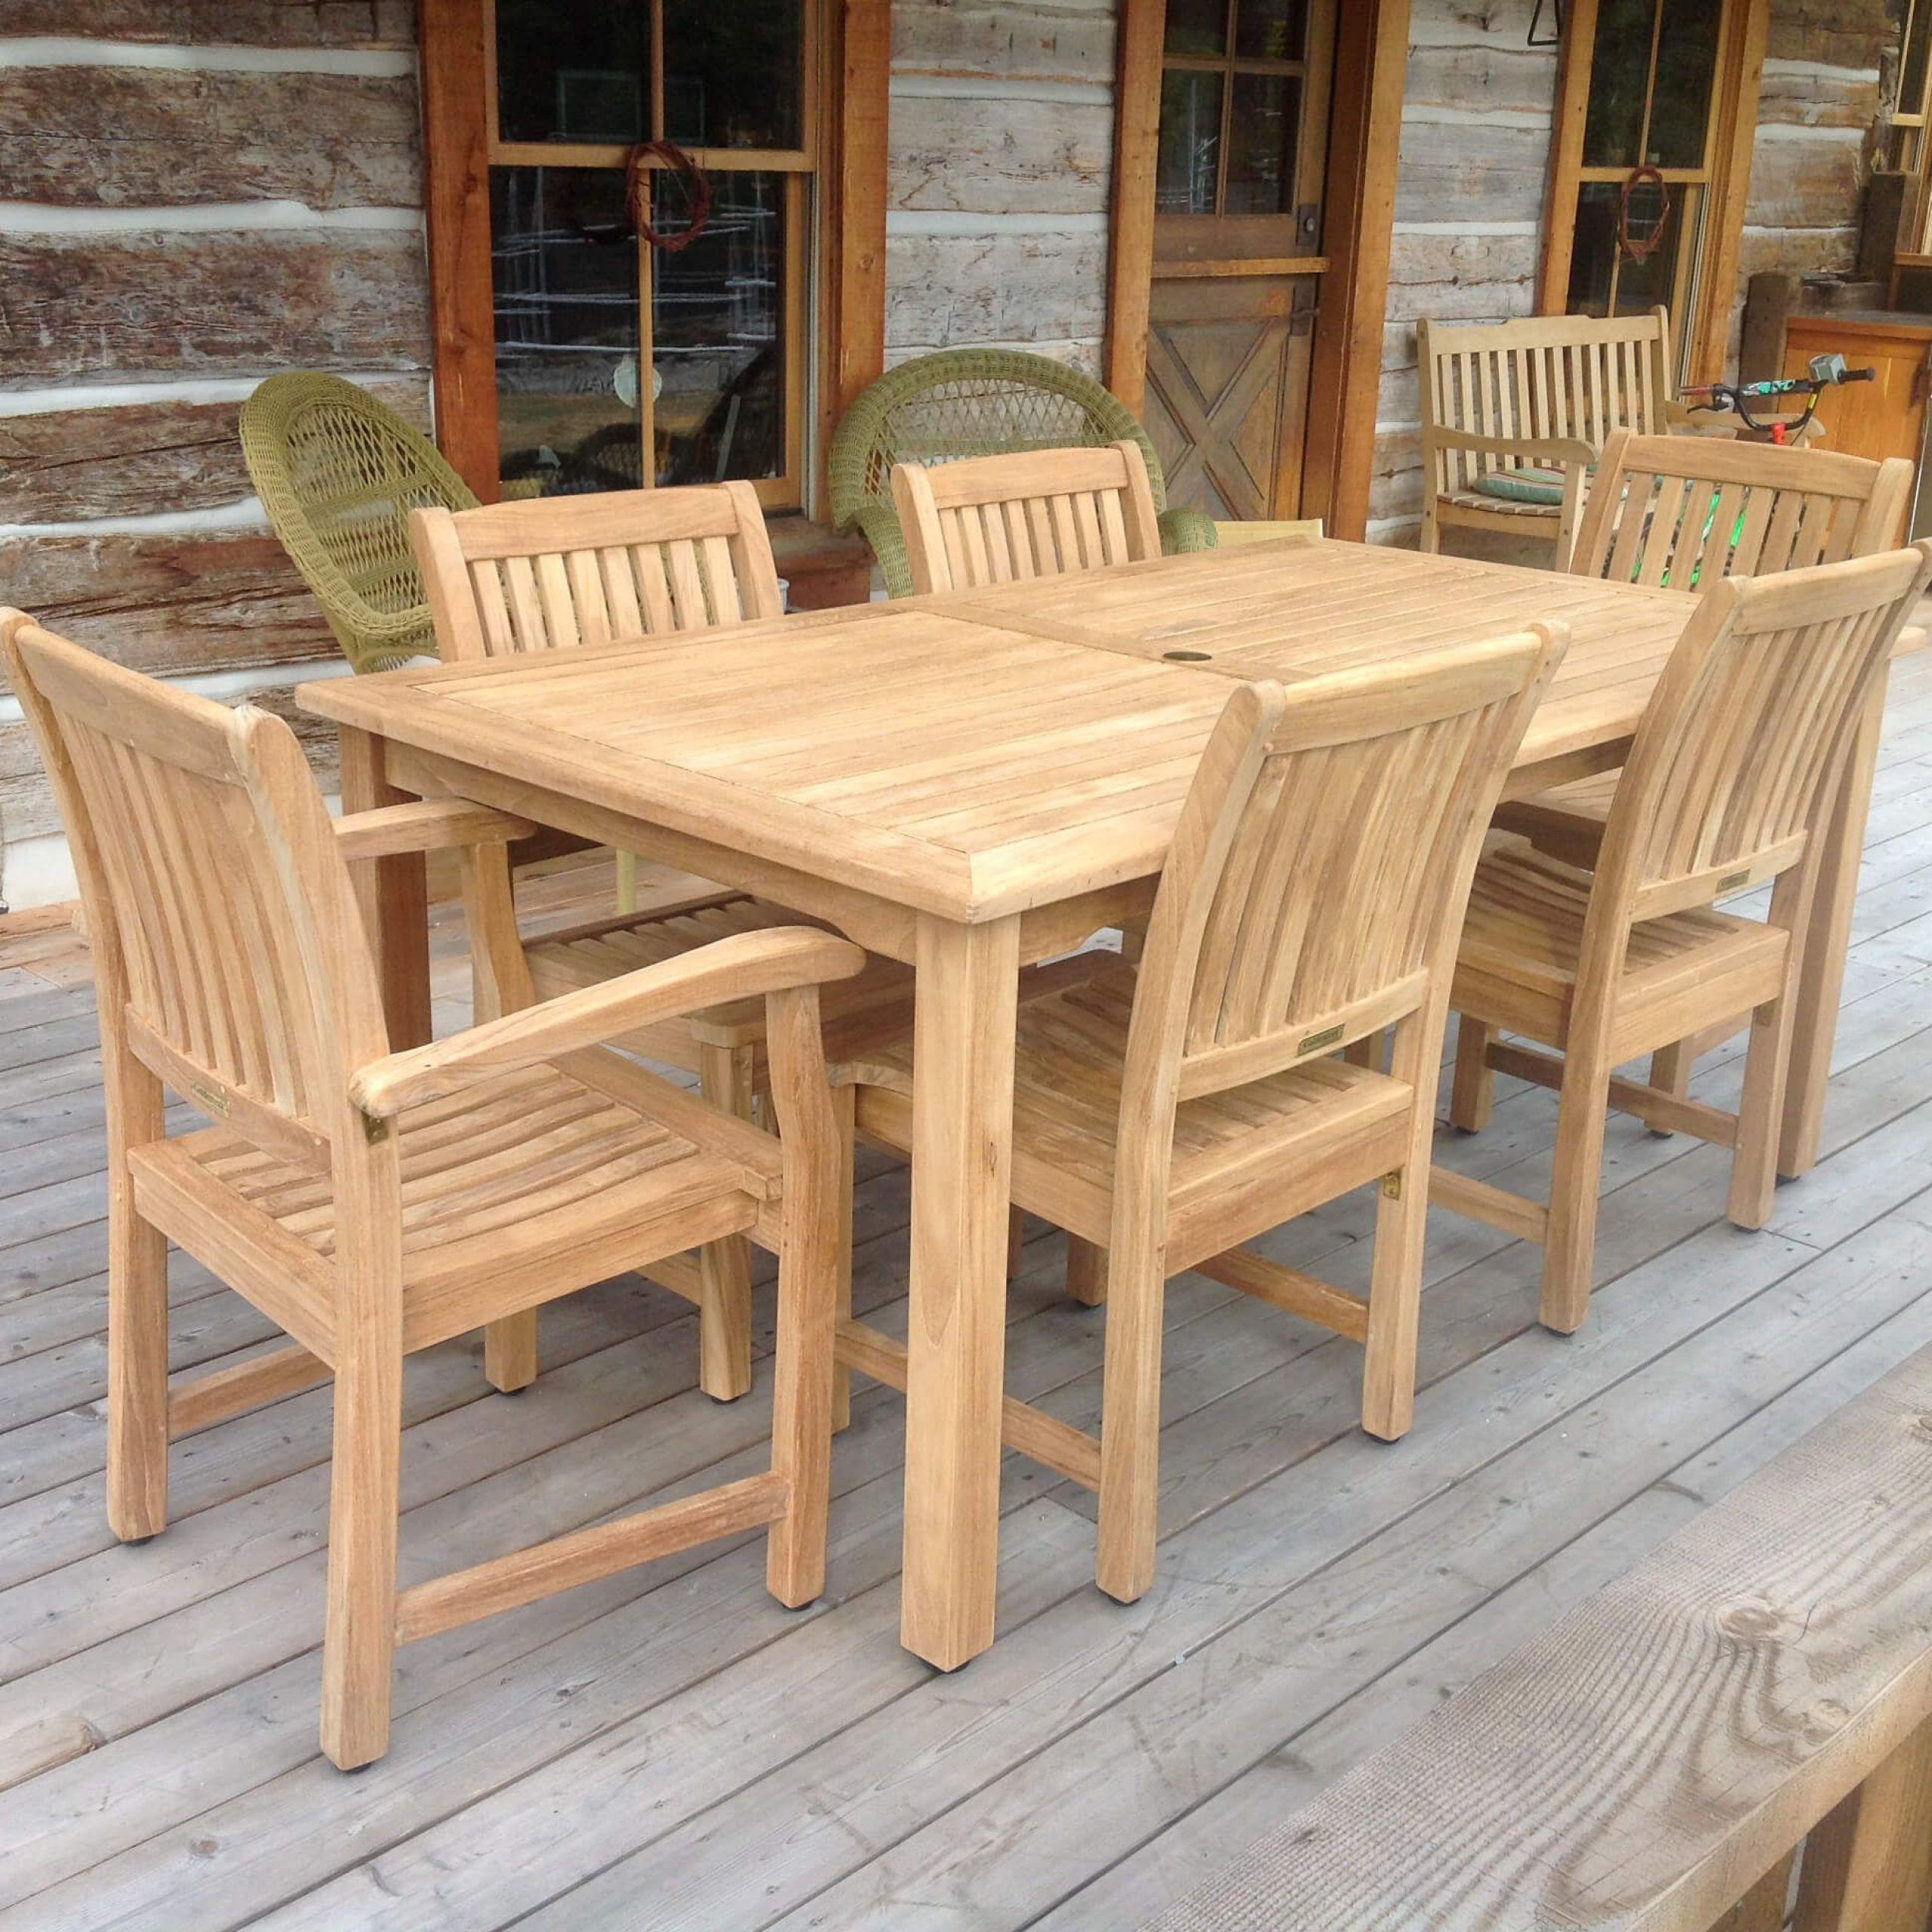 Teak Patio Dining Set For 6 Rectangular Table And 6 Teak Chairs For Teak Outdoor Square Dining Sets (View 2 of 15)